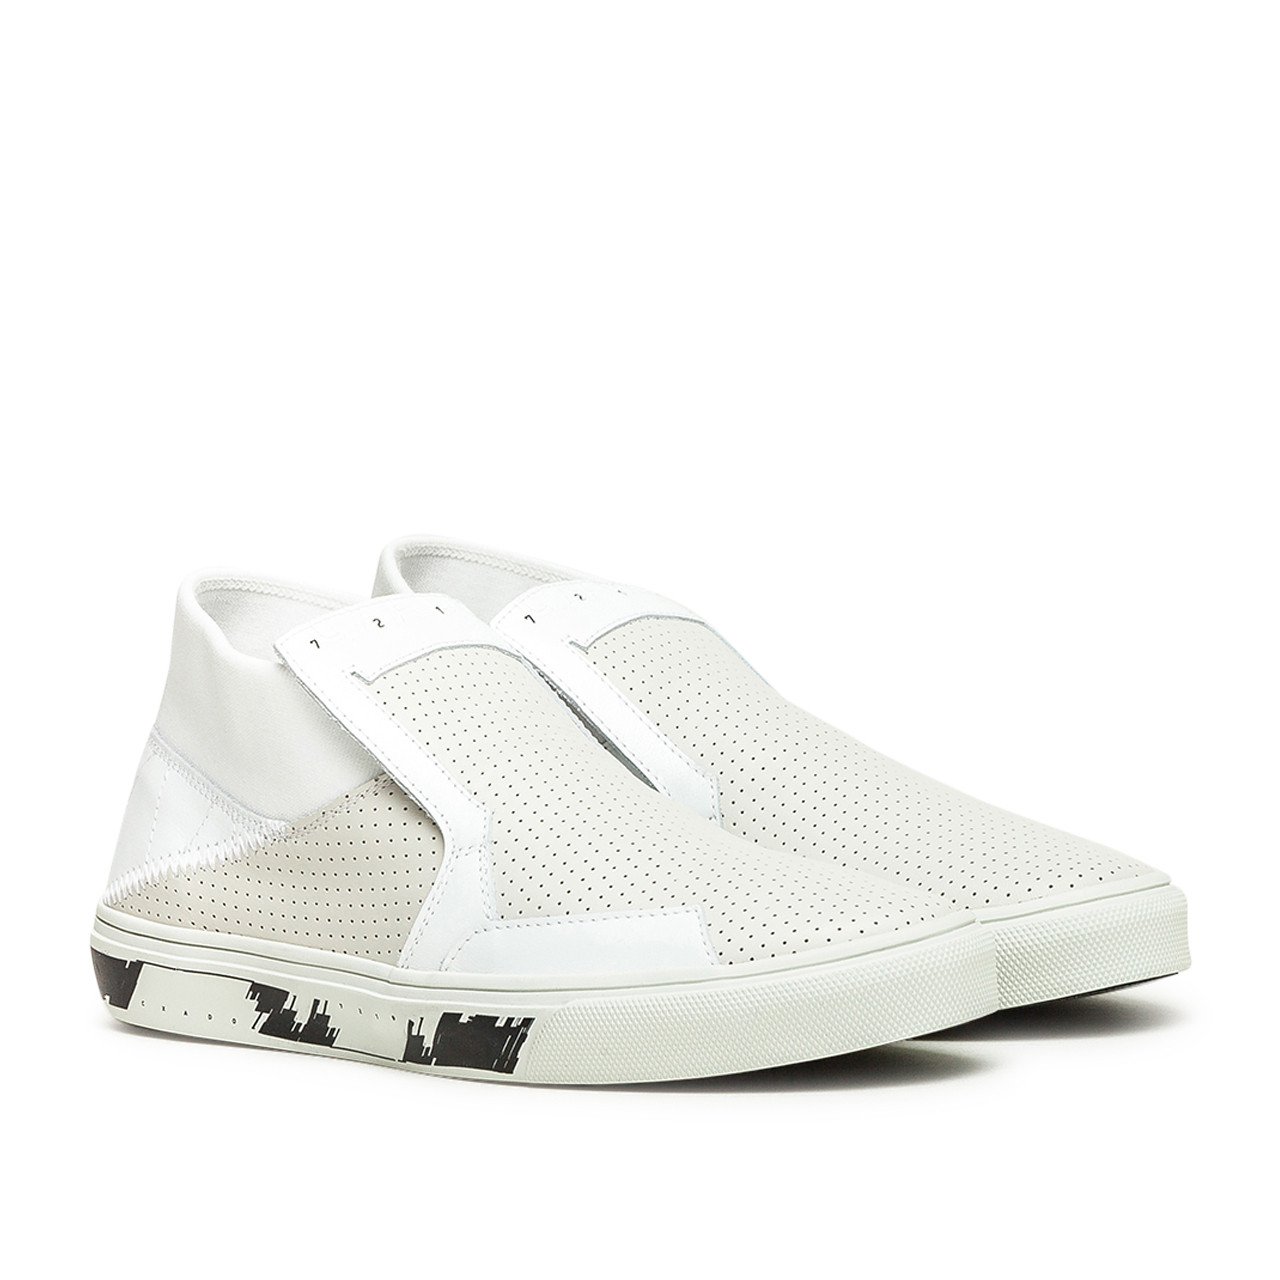 stone island shadow project slip-on mid leather (white) - 7219s0123.v0097 - a.plus - Image - 2